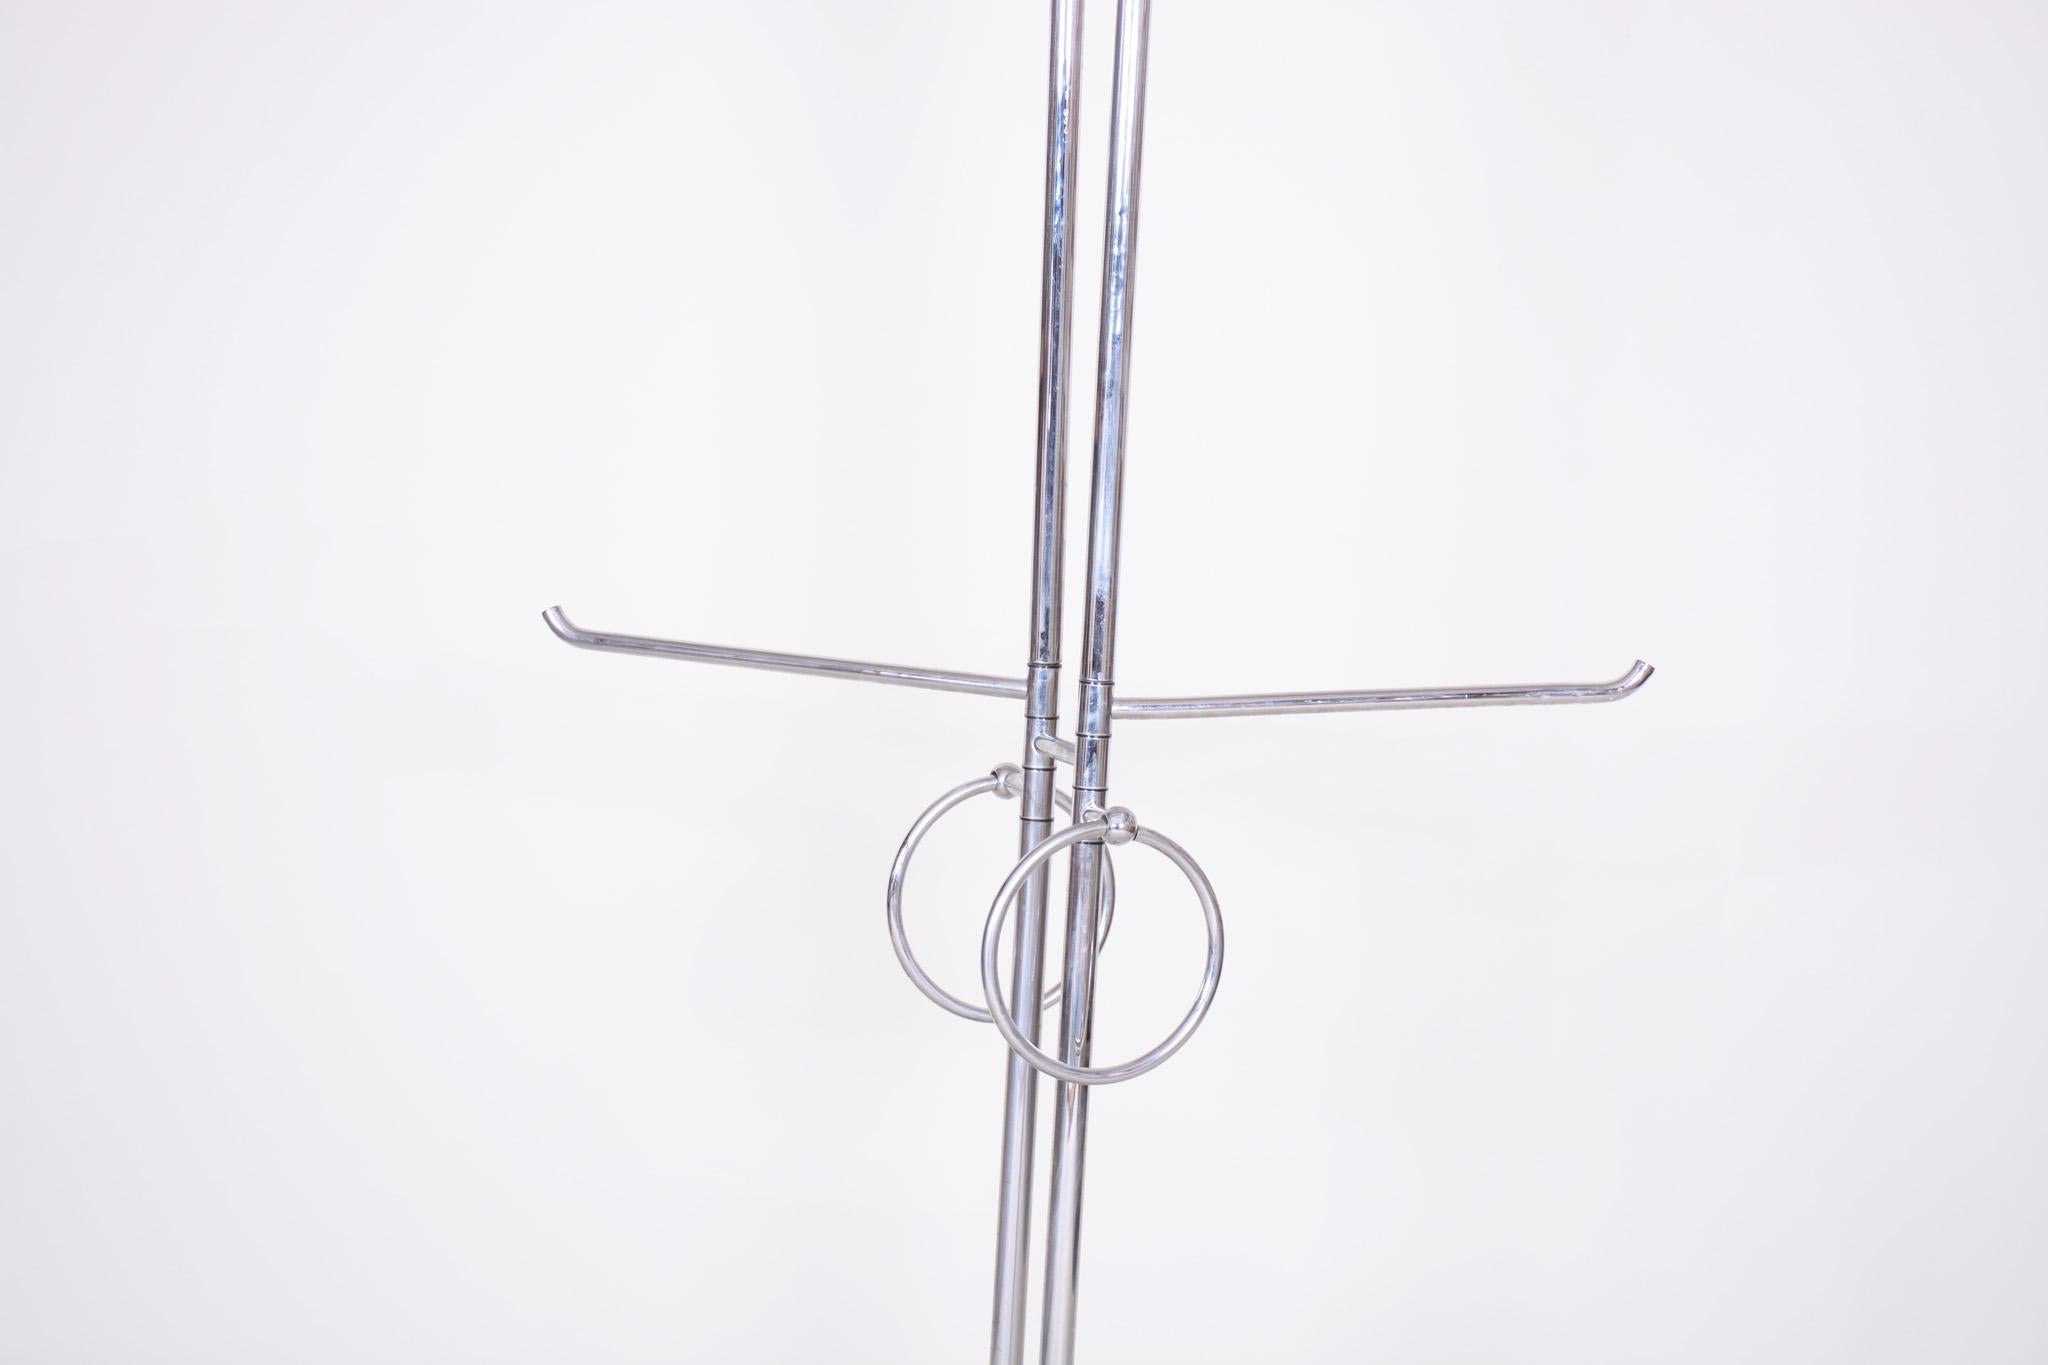 Chrome Plated Steel Coat Hook, Made in Italy, 1960s, Mid-Century Modern 1